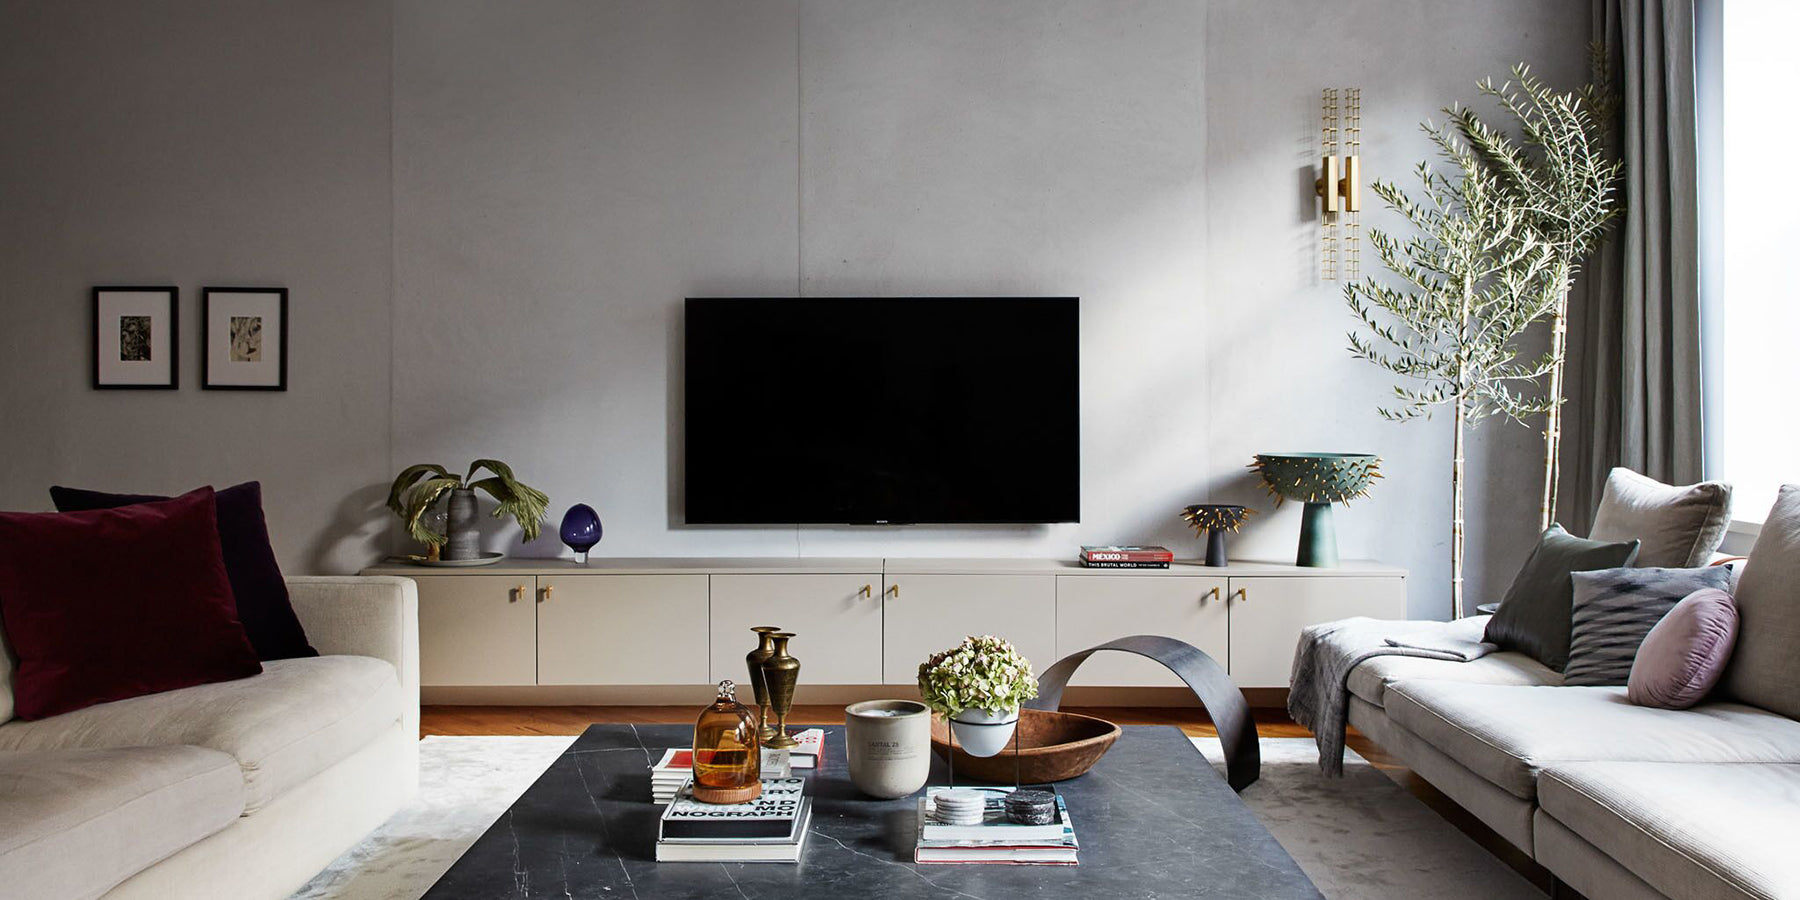 An Entertainment Console that's Dripping with Style